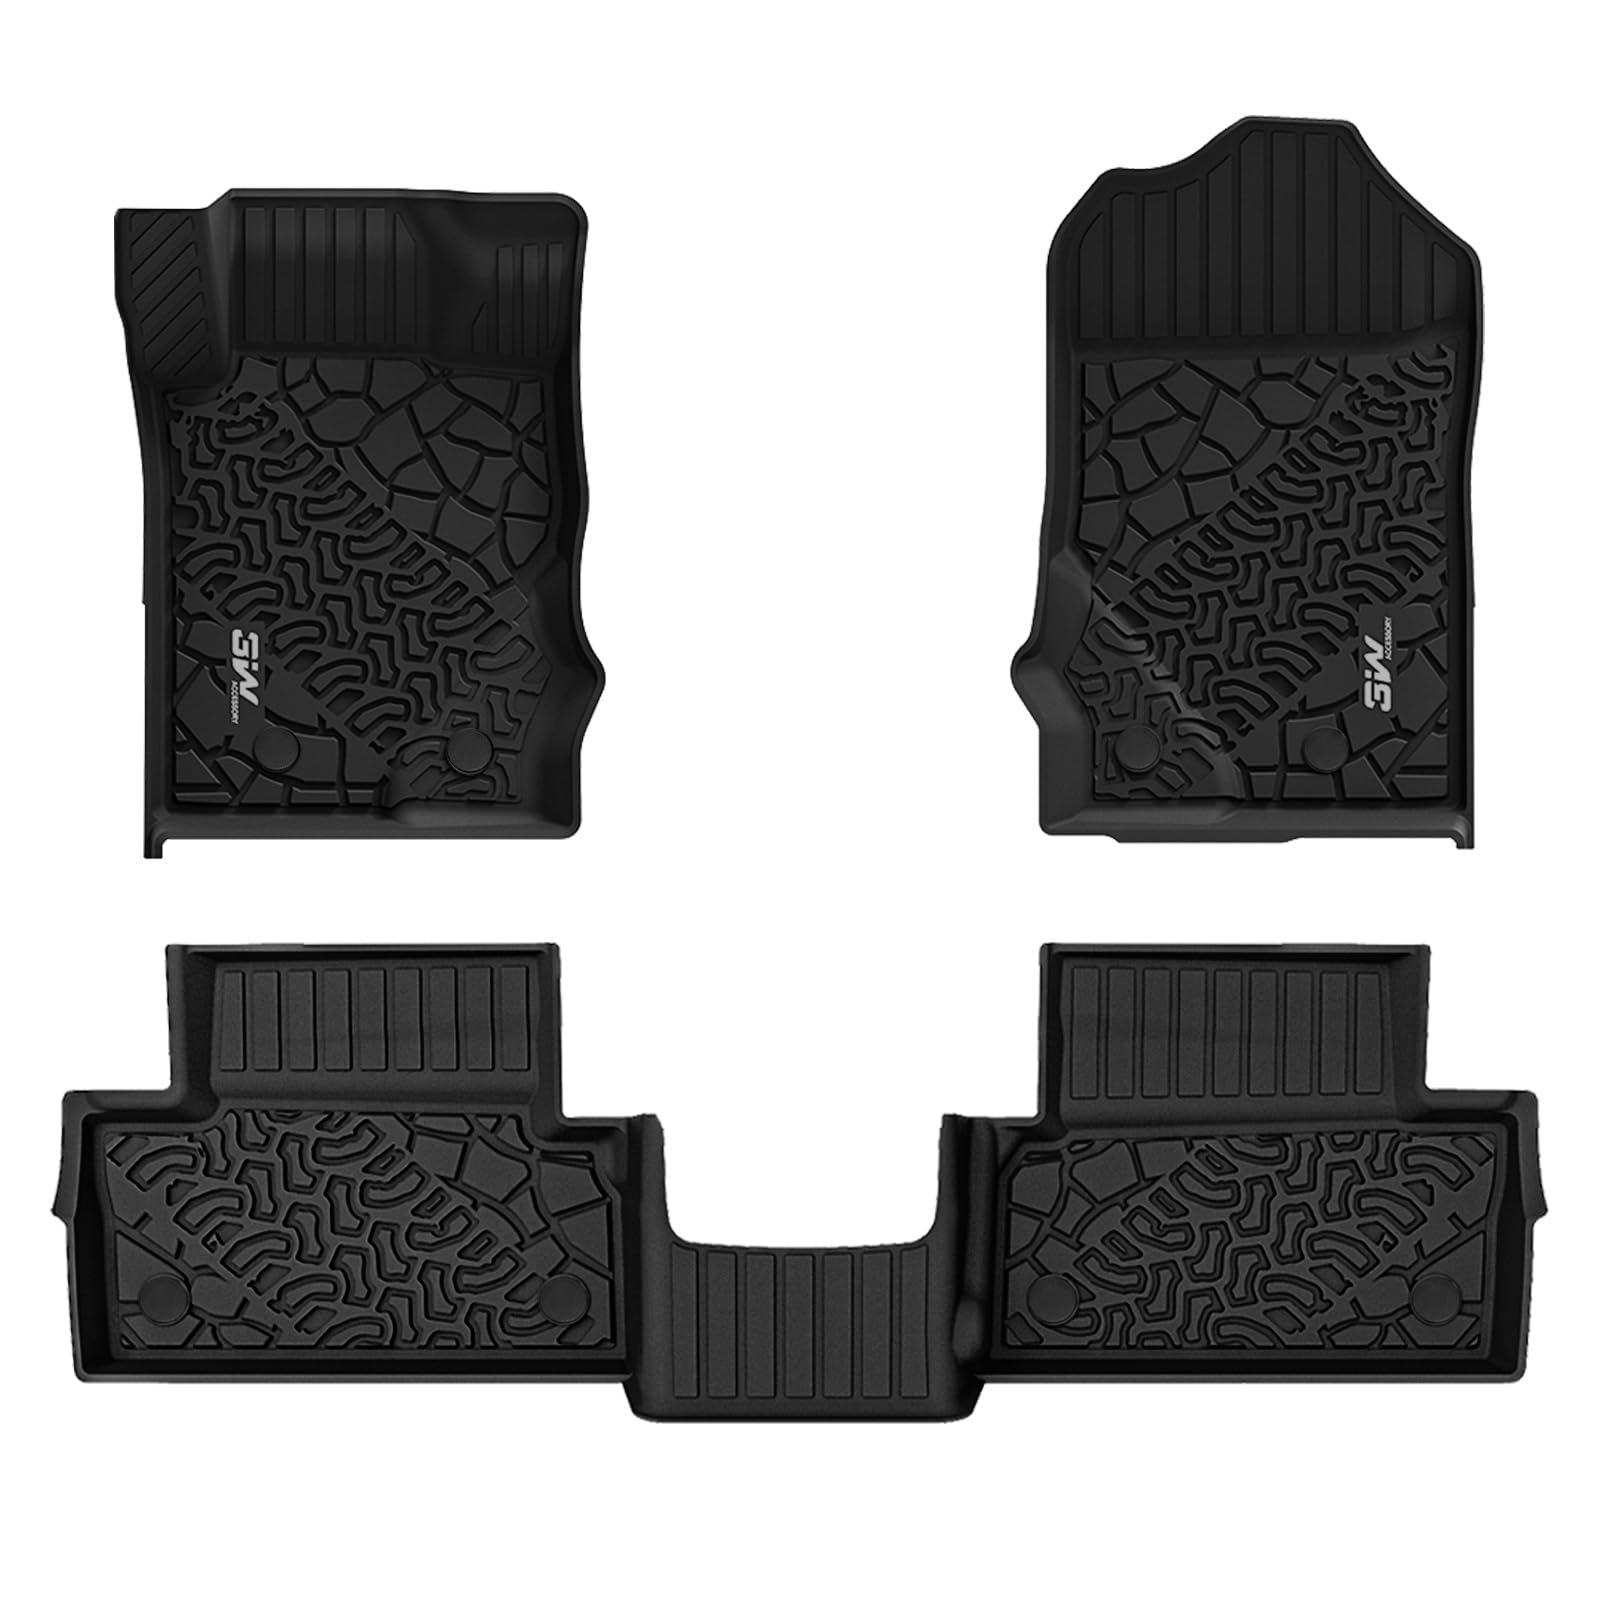 3W Ford Bronco 2-Door 2021-2023 Floor Mats Trunk Mats TPE Material & All-Weather Protection Vehicles & Parts 3Wliners 2021-2023 2-Door 2021-2023 1st&2nd Row Mats